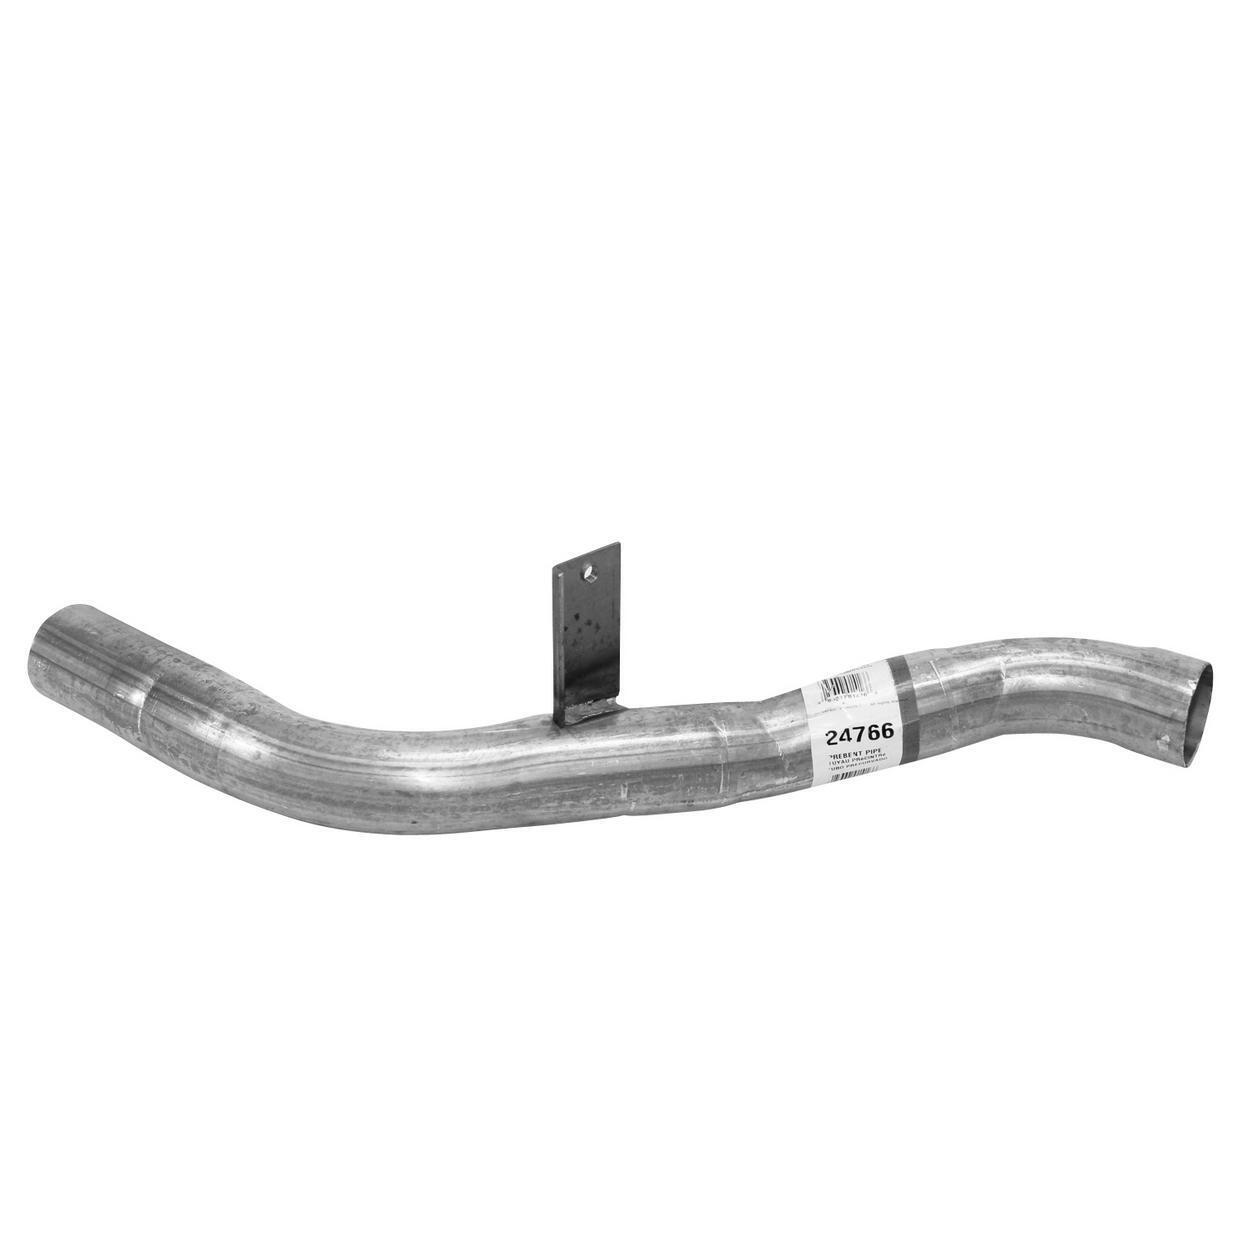 Exhaust Tail Pipe for 1985 Pontiac 6000 2.8L V6 GAS OHV